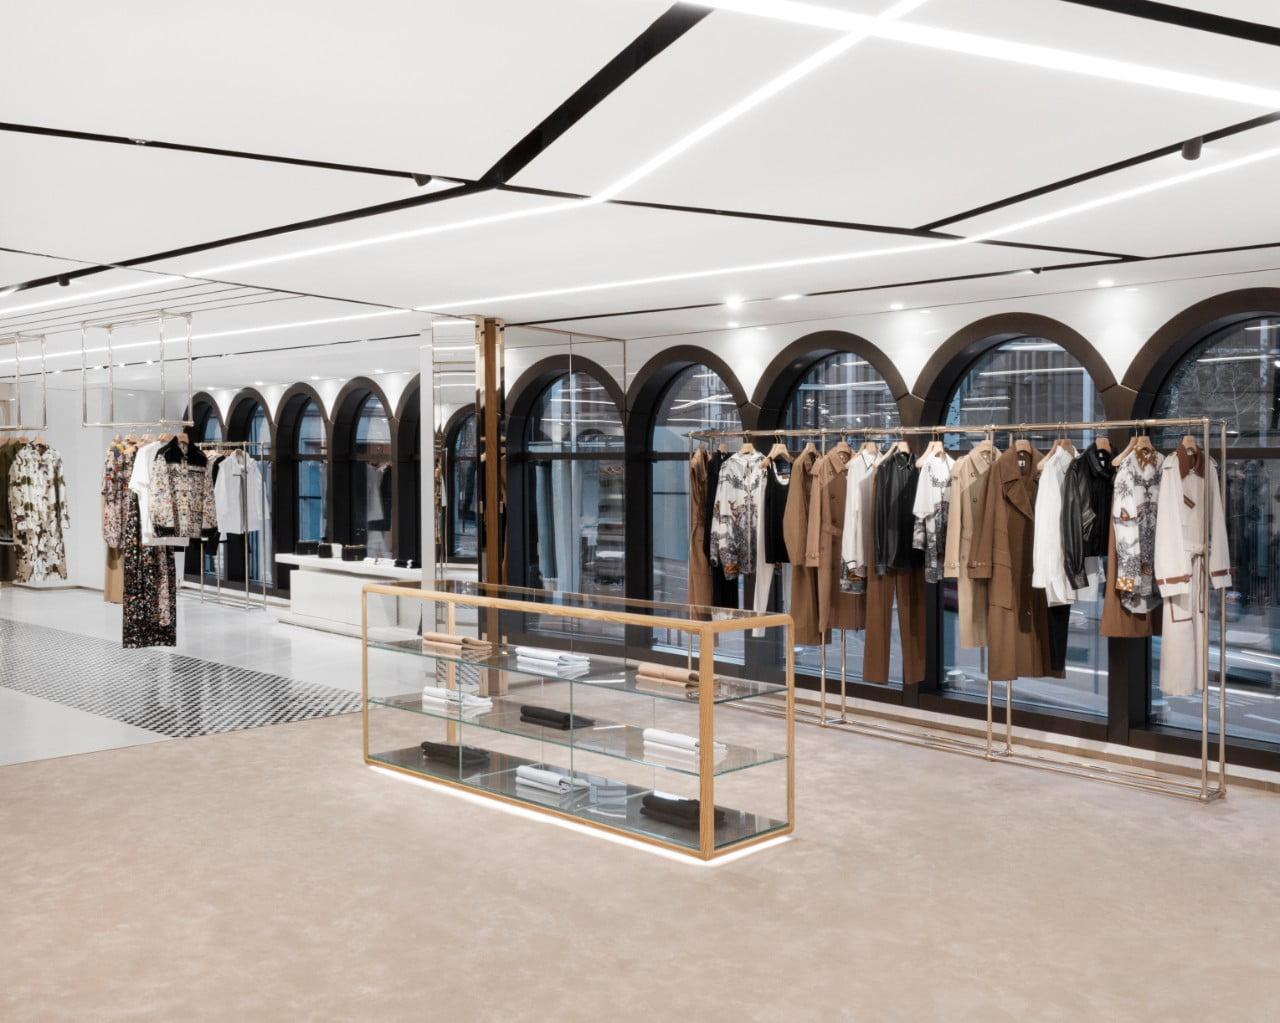 Inside Burberry’s new flagship store in London